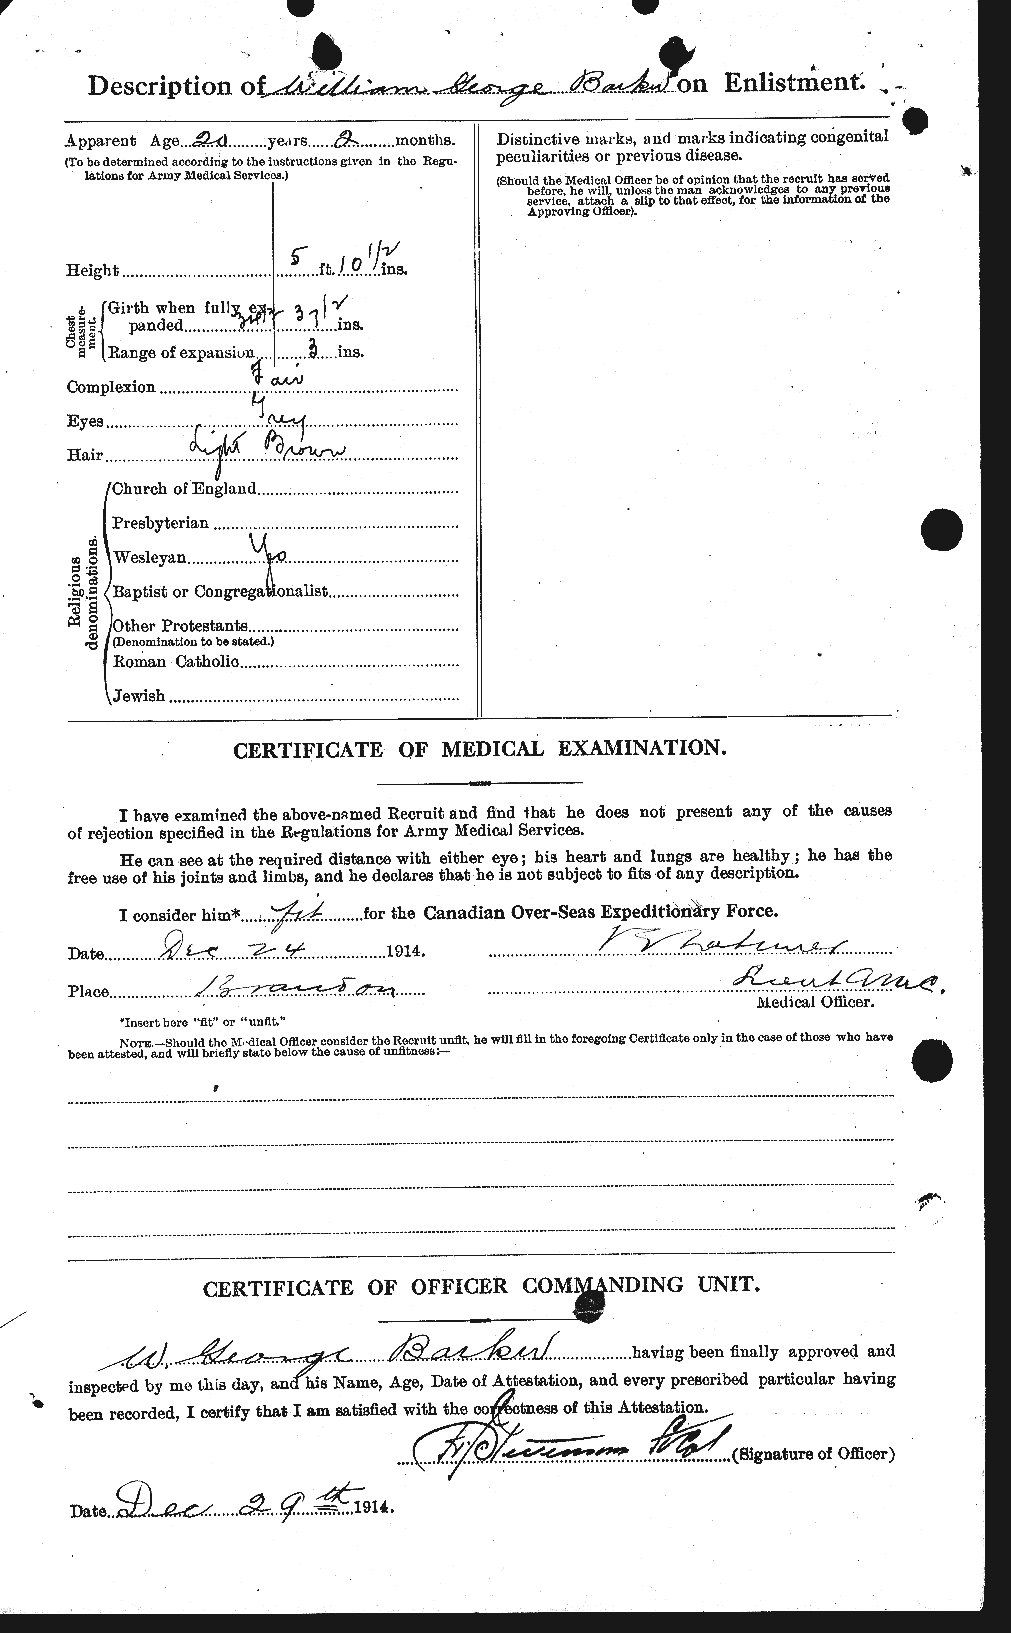 Personnel Records of the First World War - CEF 226901b